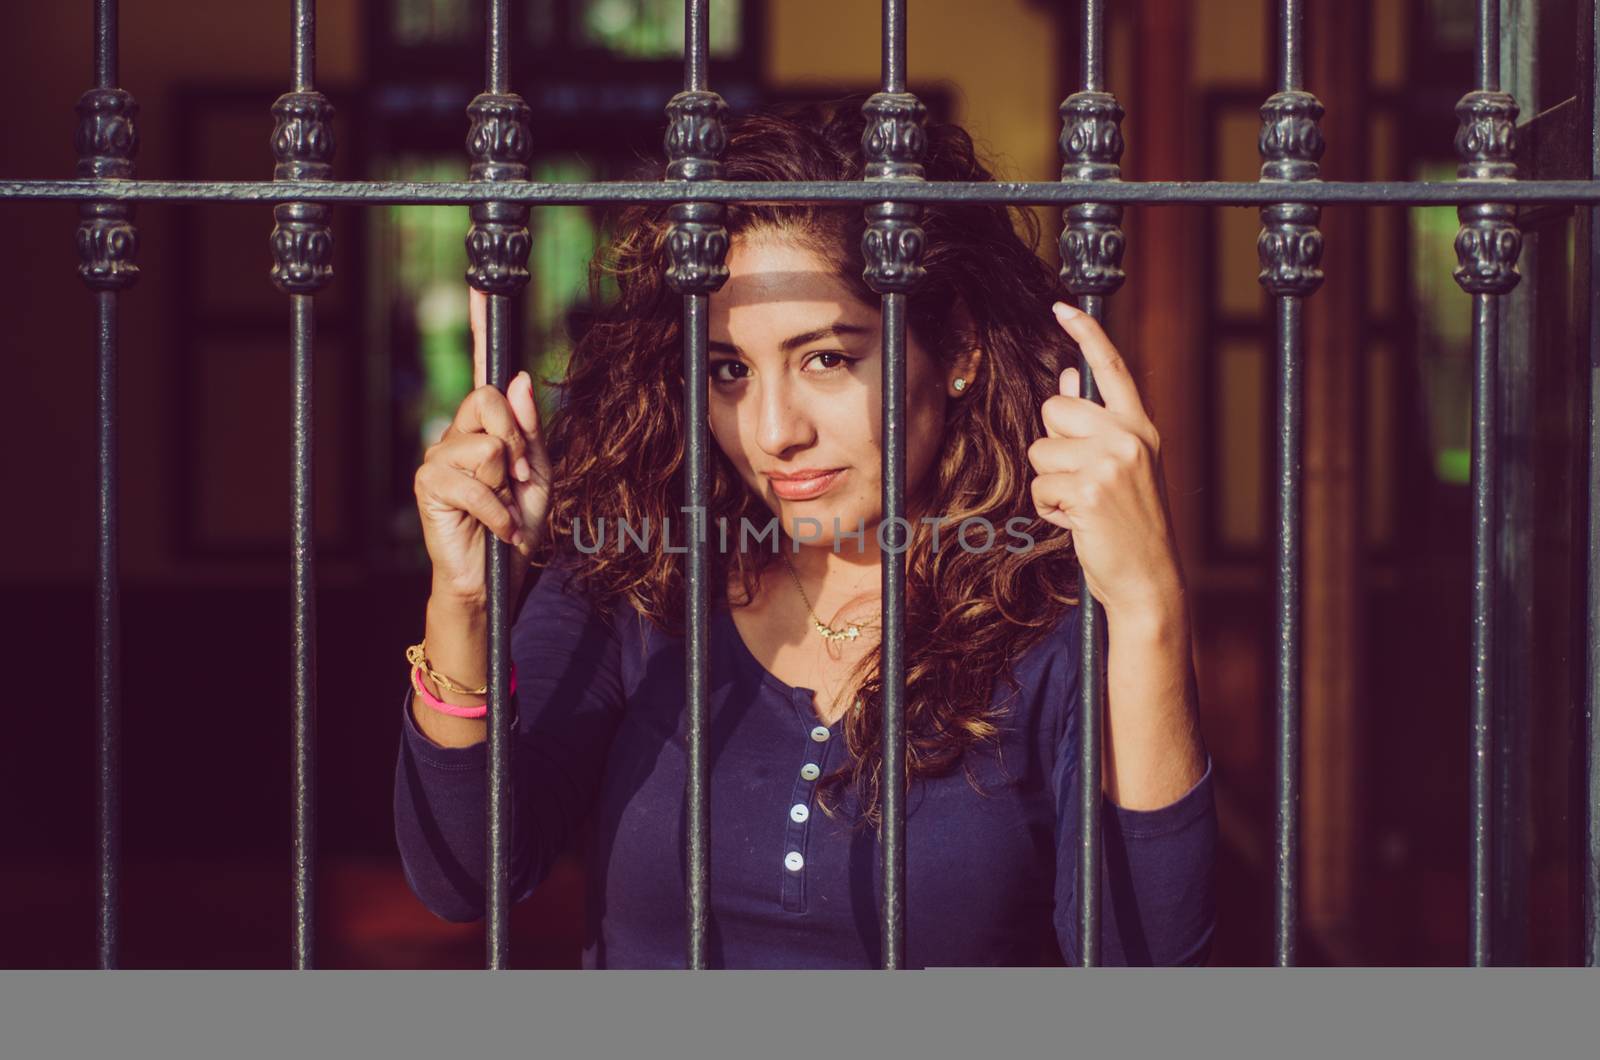 Young girl closed behind bars, network, as in prison. looking sexy with serious and smiling look